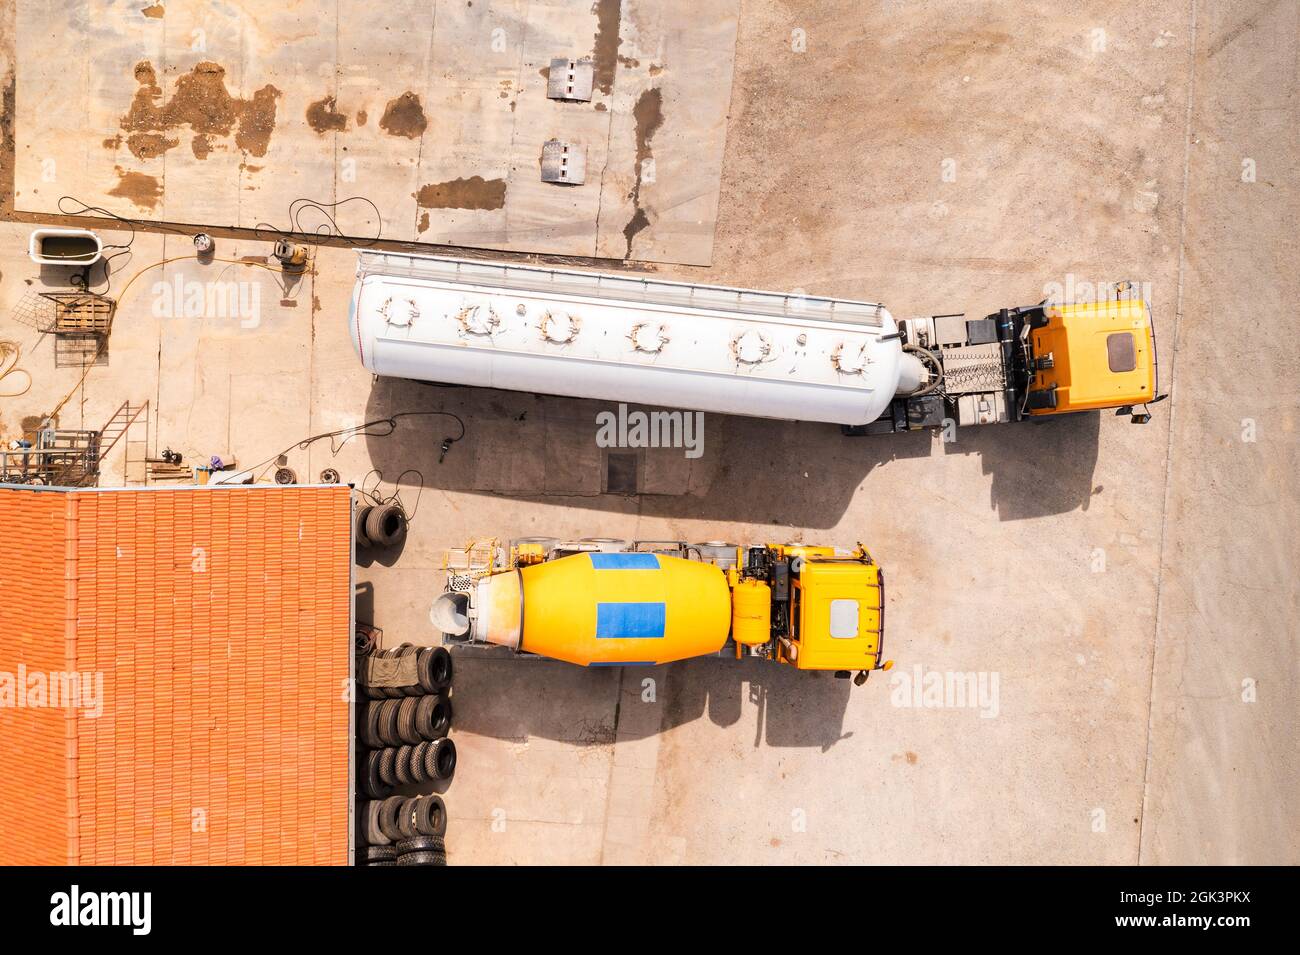 Aerial view of two trucks in maintenance repair shop, top down drone photo Stock Photo